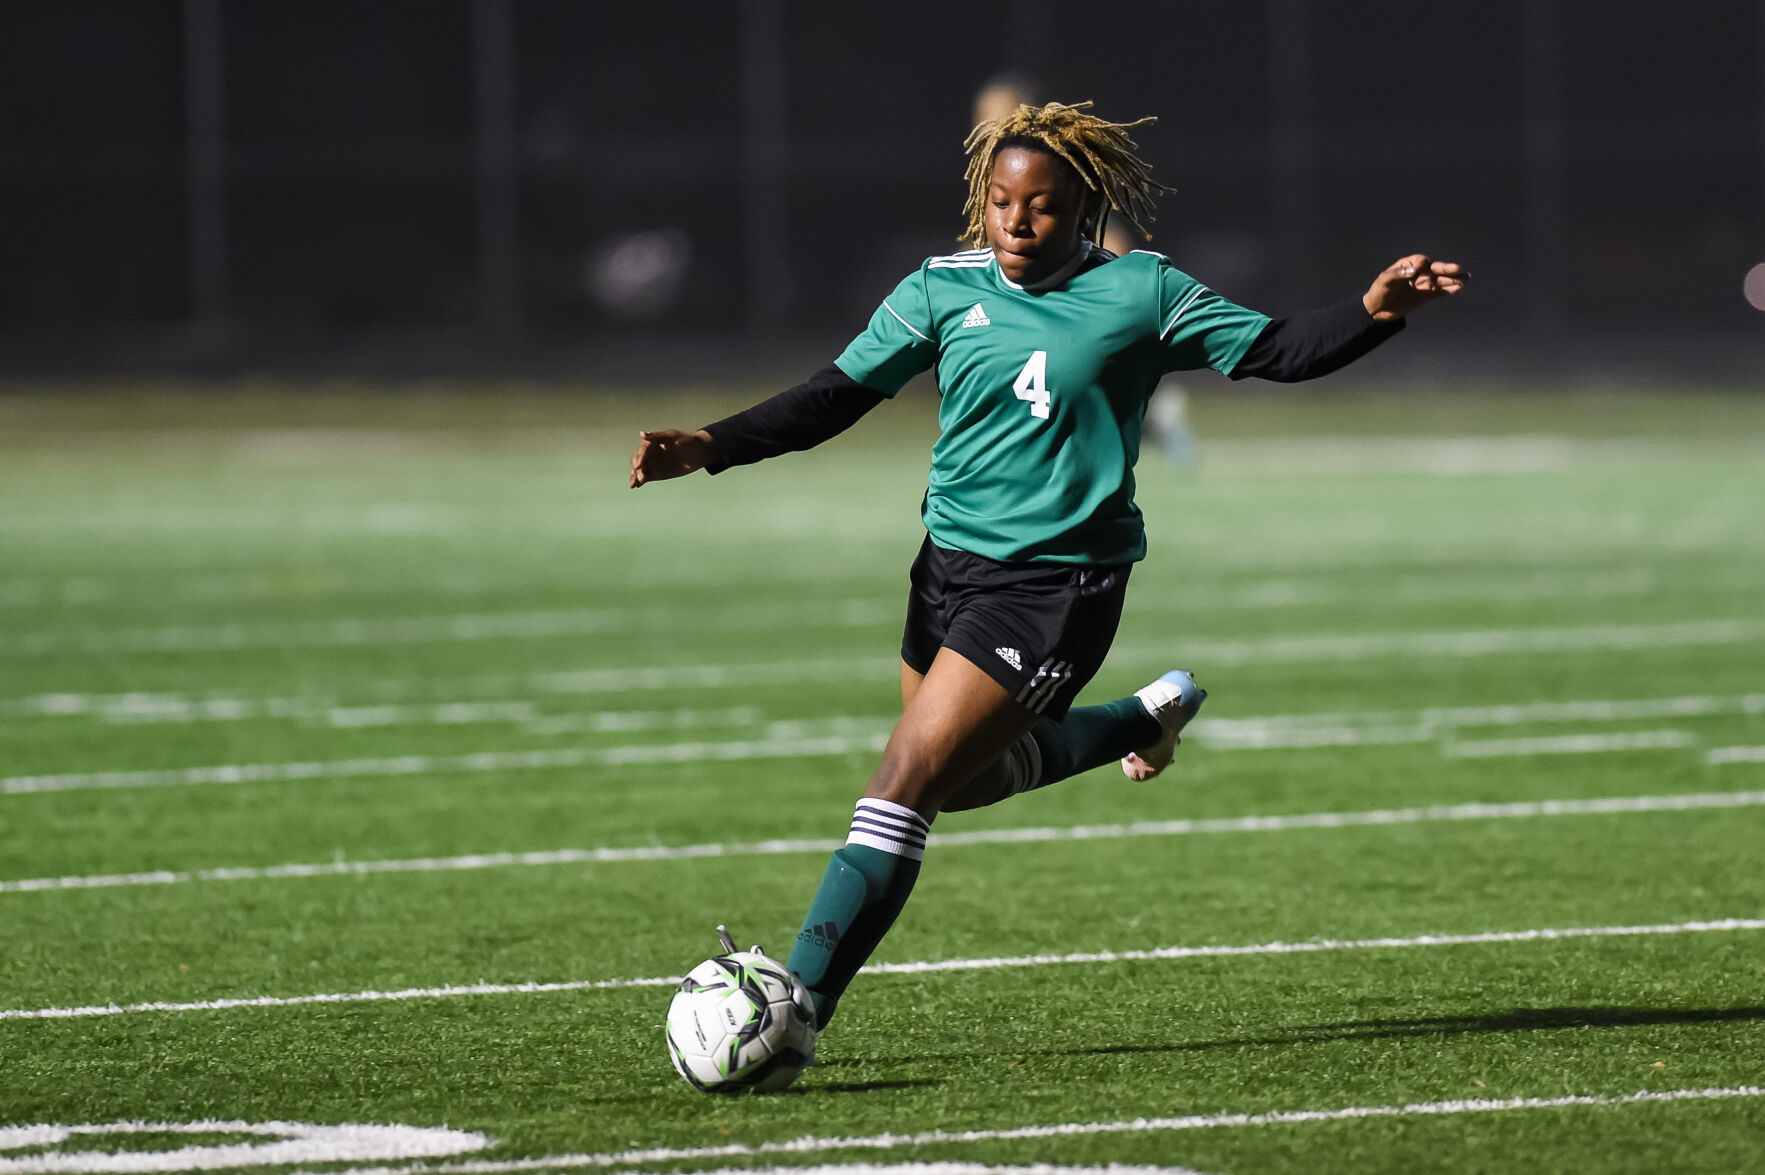 Tuesday Soccer Roundup: Rockwall Dominates with Hat Tricks, Wins Over Mesquite